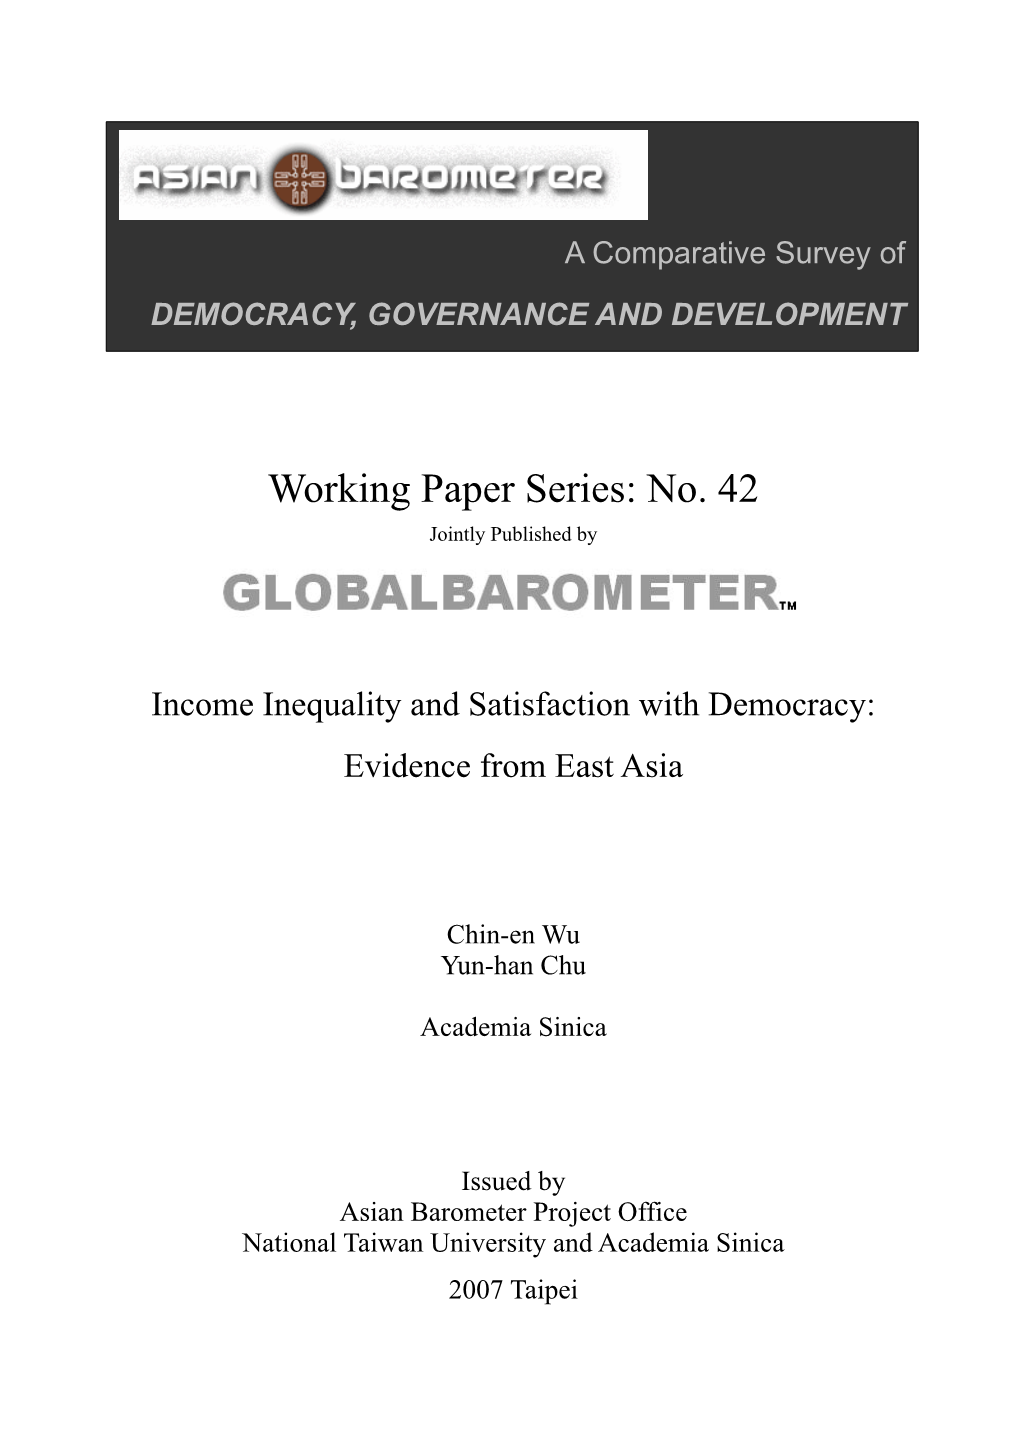 Working Paper Series: No. 42 Jointly Published By